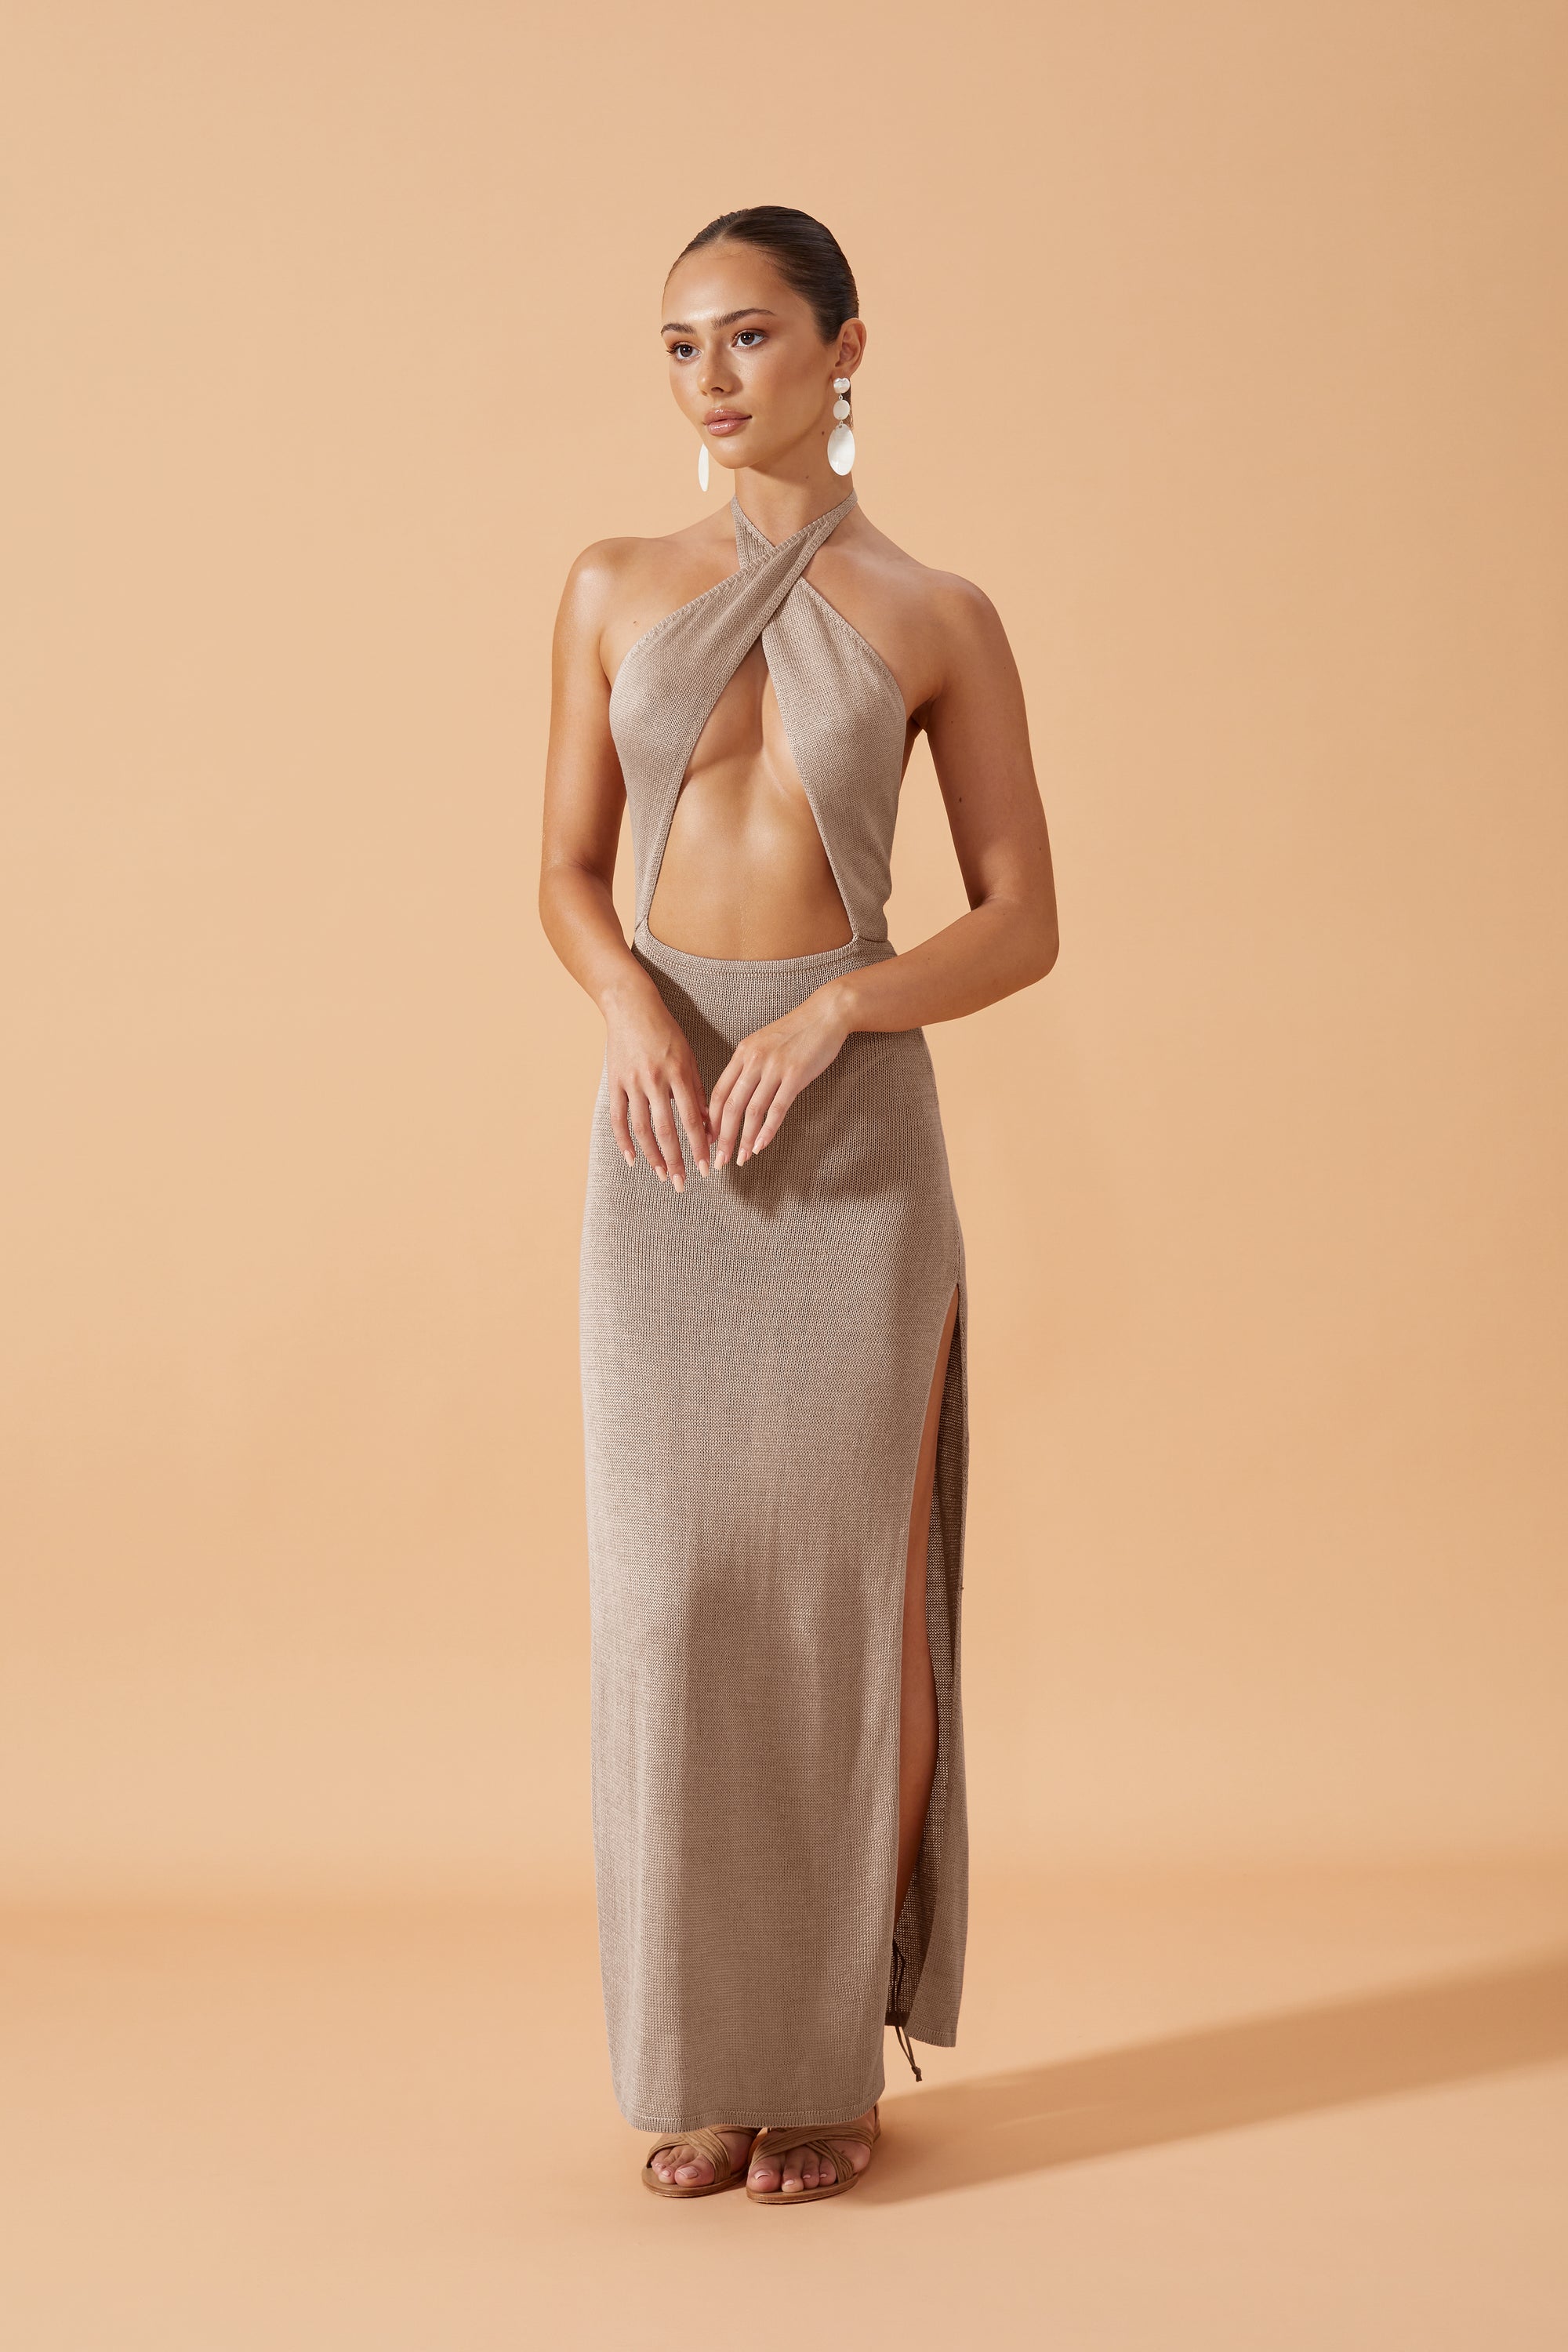 Flook The Label Lua Knit Long Dress in Taupe. Open front crossed at the neck and slits on both sides. Front ViewFlook The Label Lua Knit Long Dress in Taupe. Open front crossed at the neck and slits on both sides. Front View